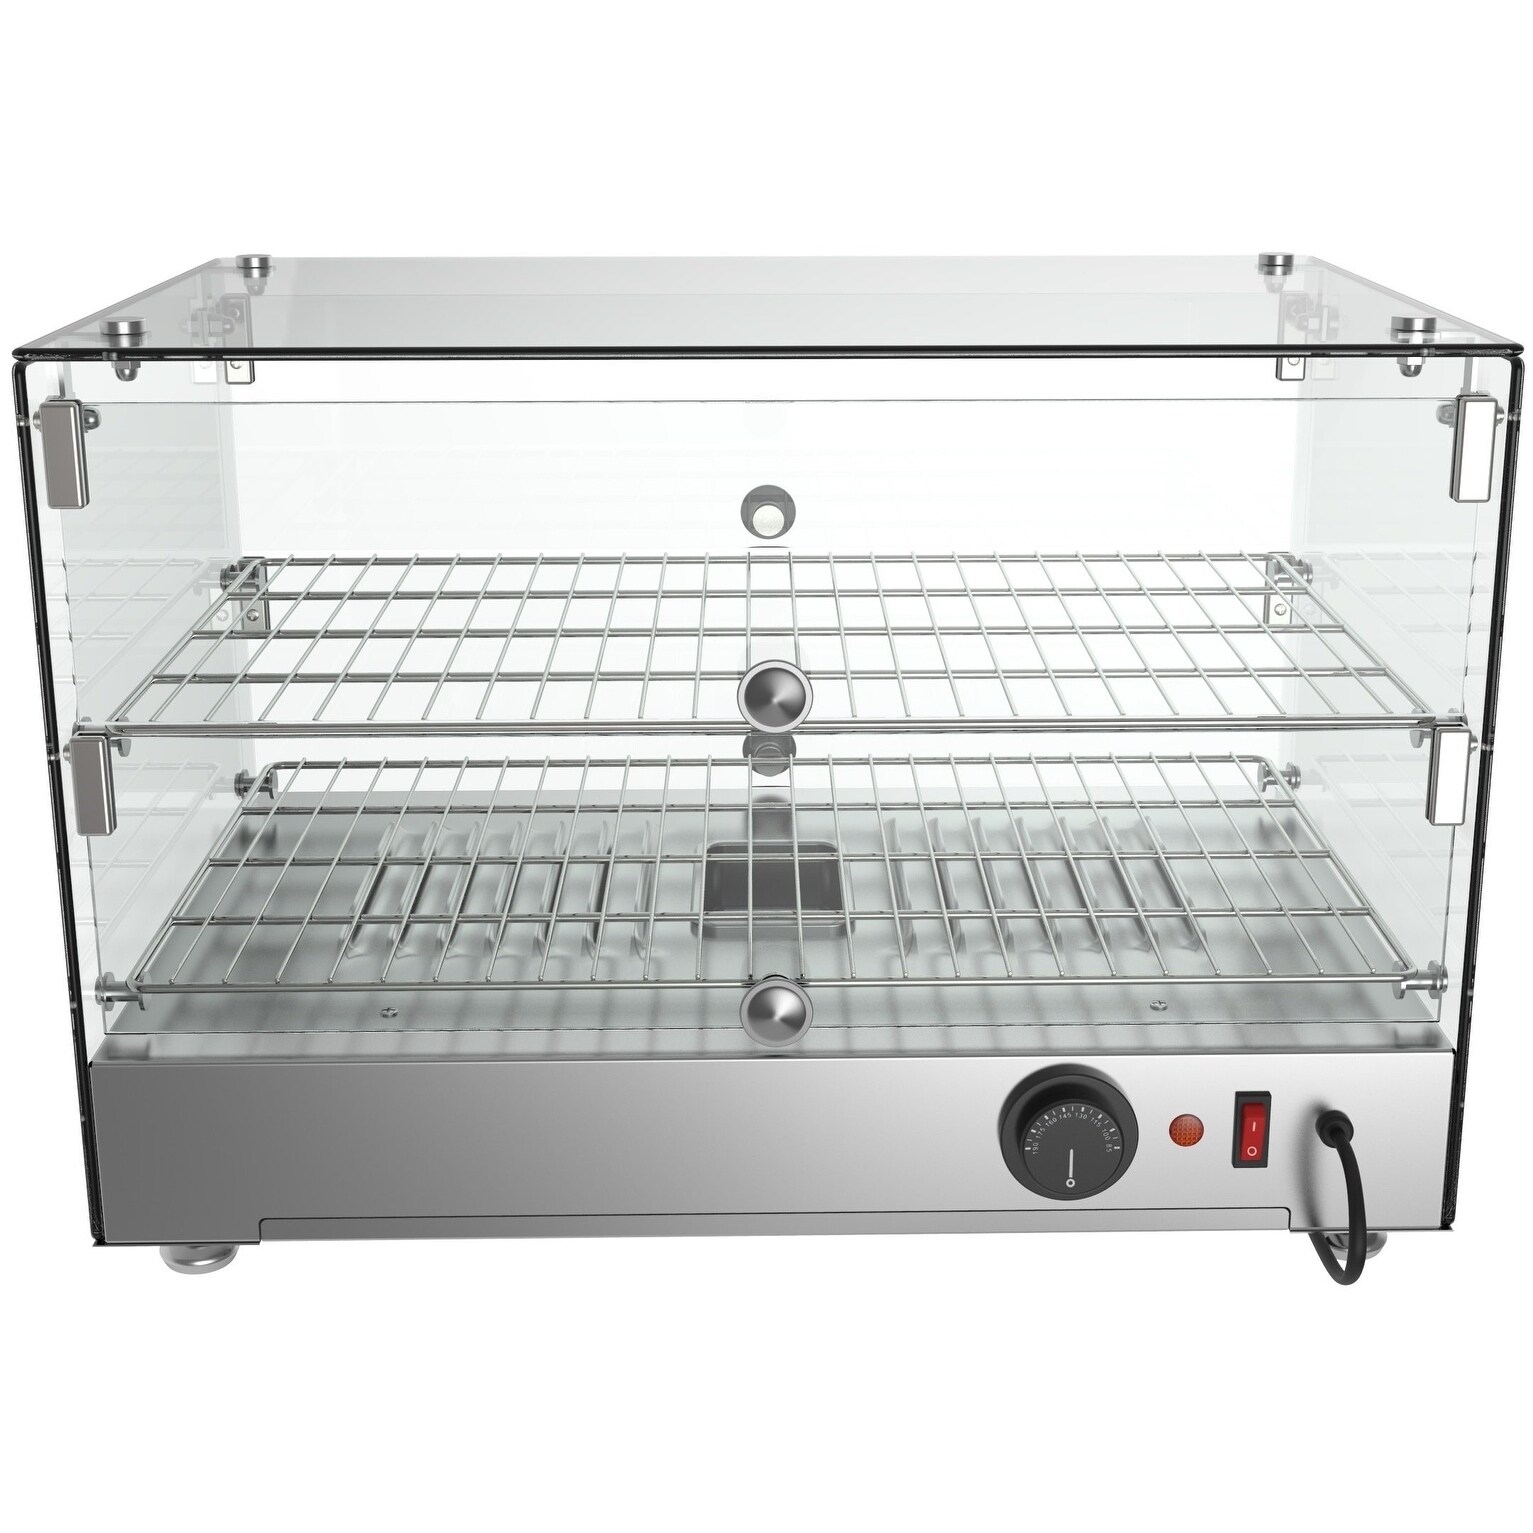 Koolmore 34 Stainless Steel Commercial Countertop Food Warmer Display Case with LED Lighting - 5.6. Cu ft.